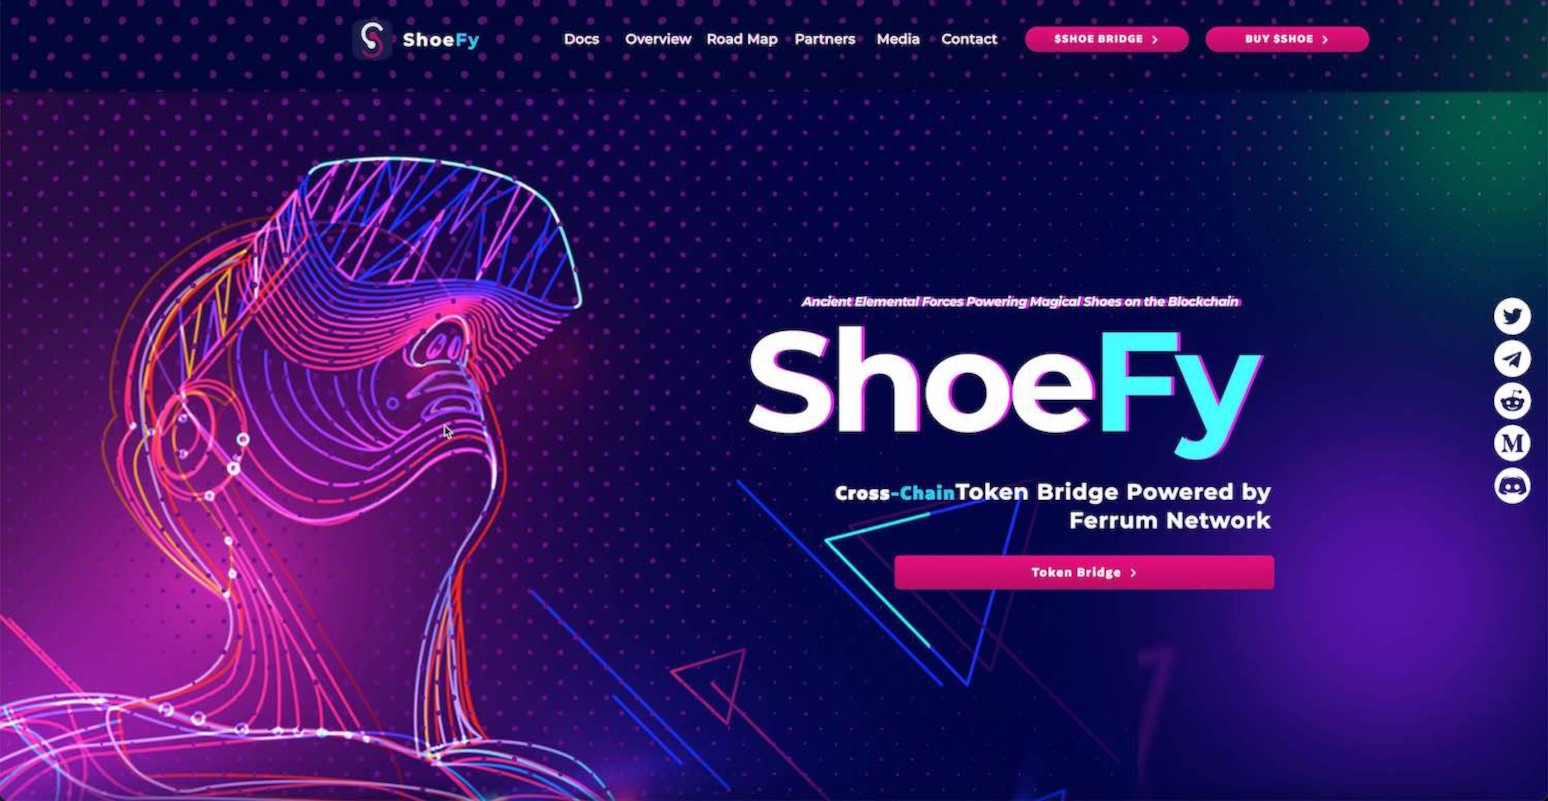 shoefy featured